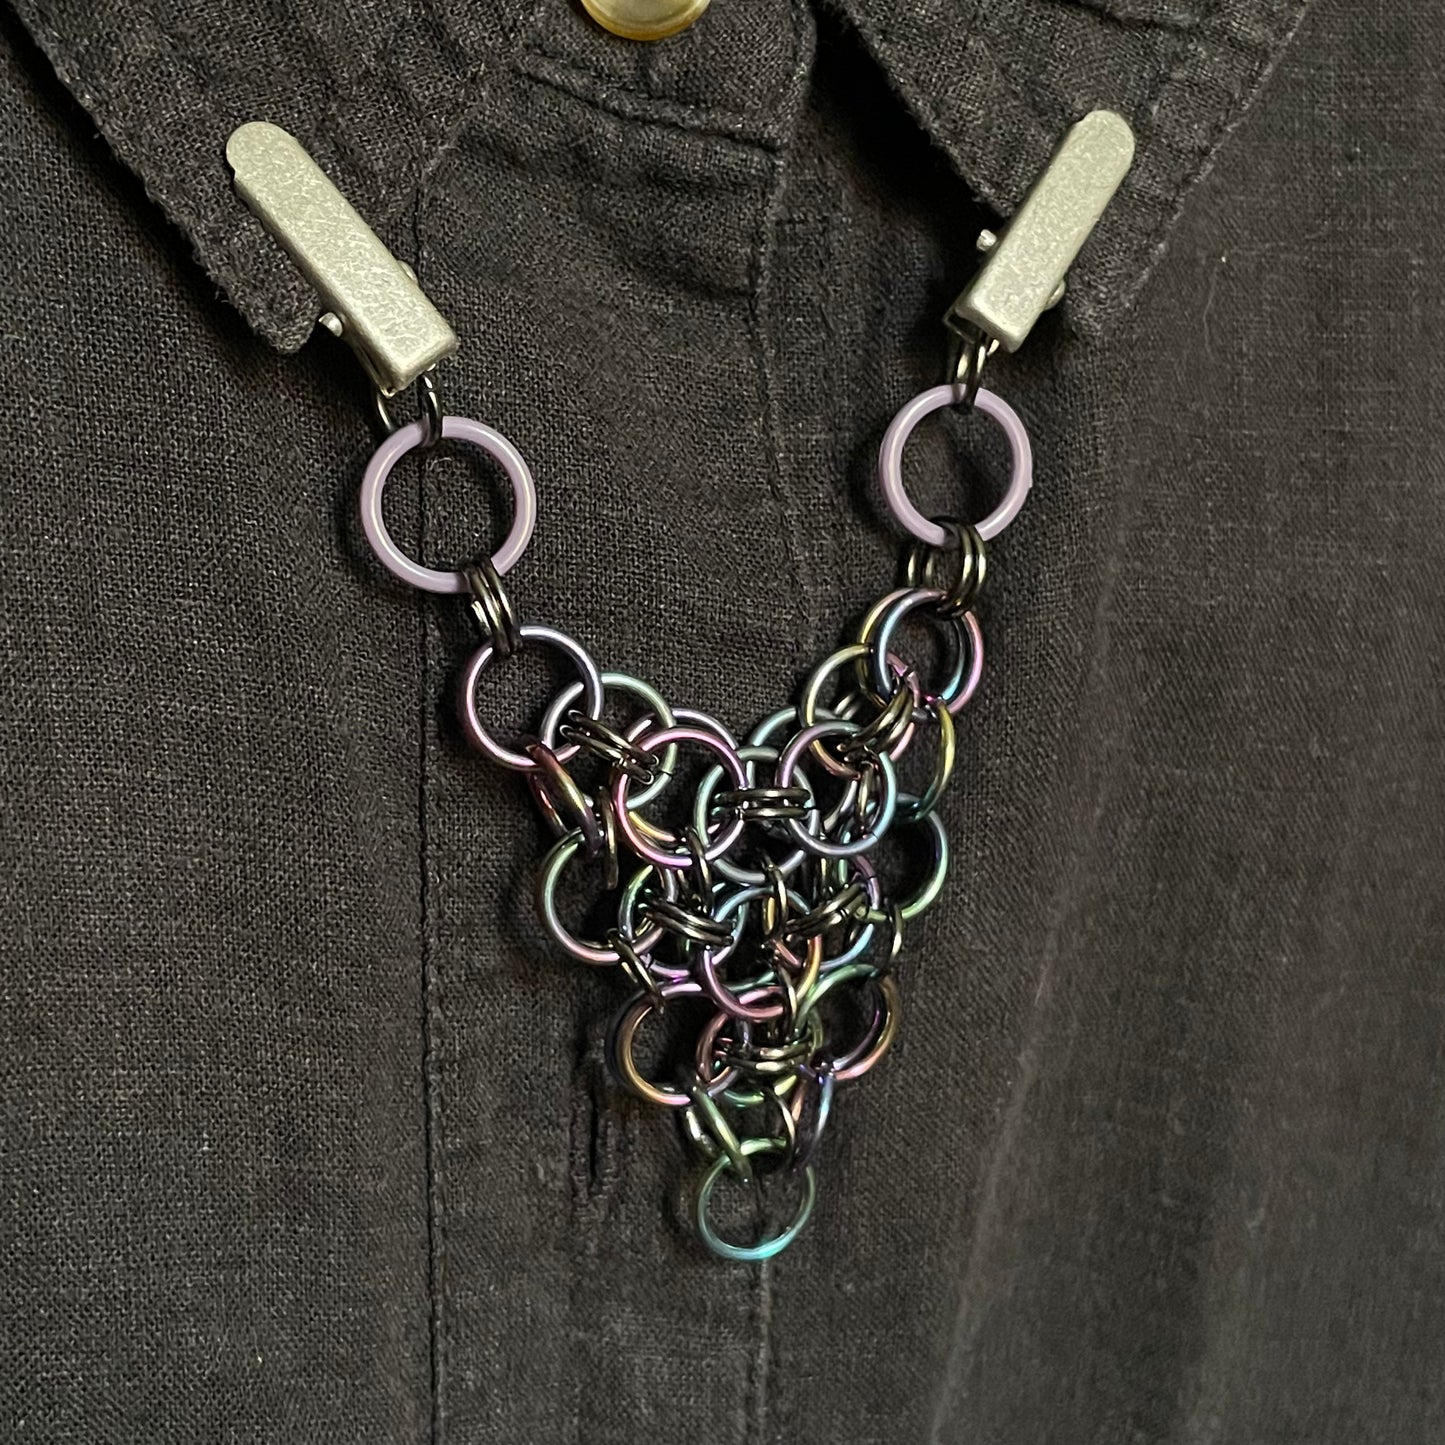 Oil slick chainmaille collar chain